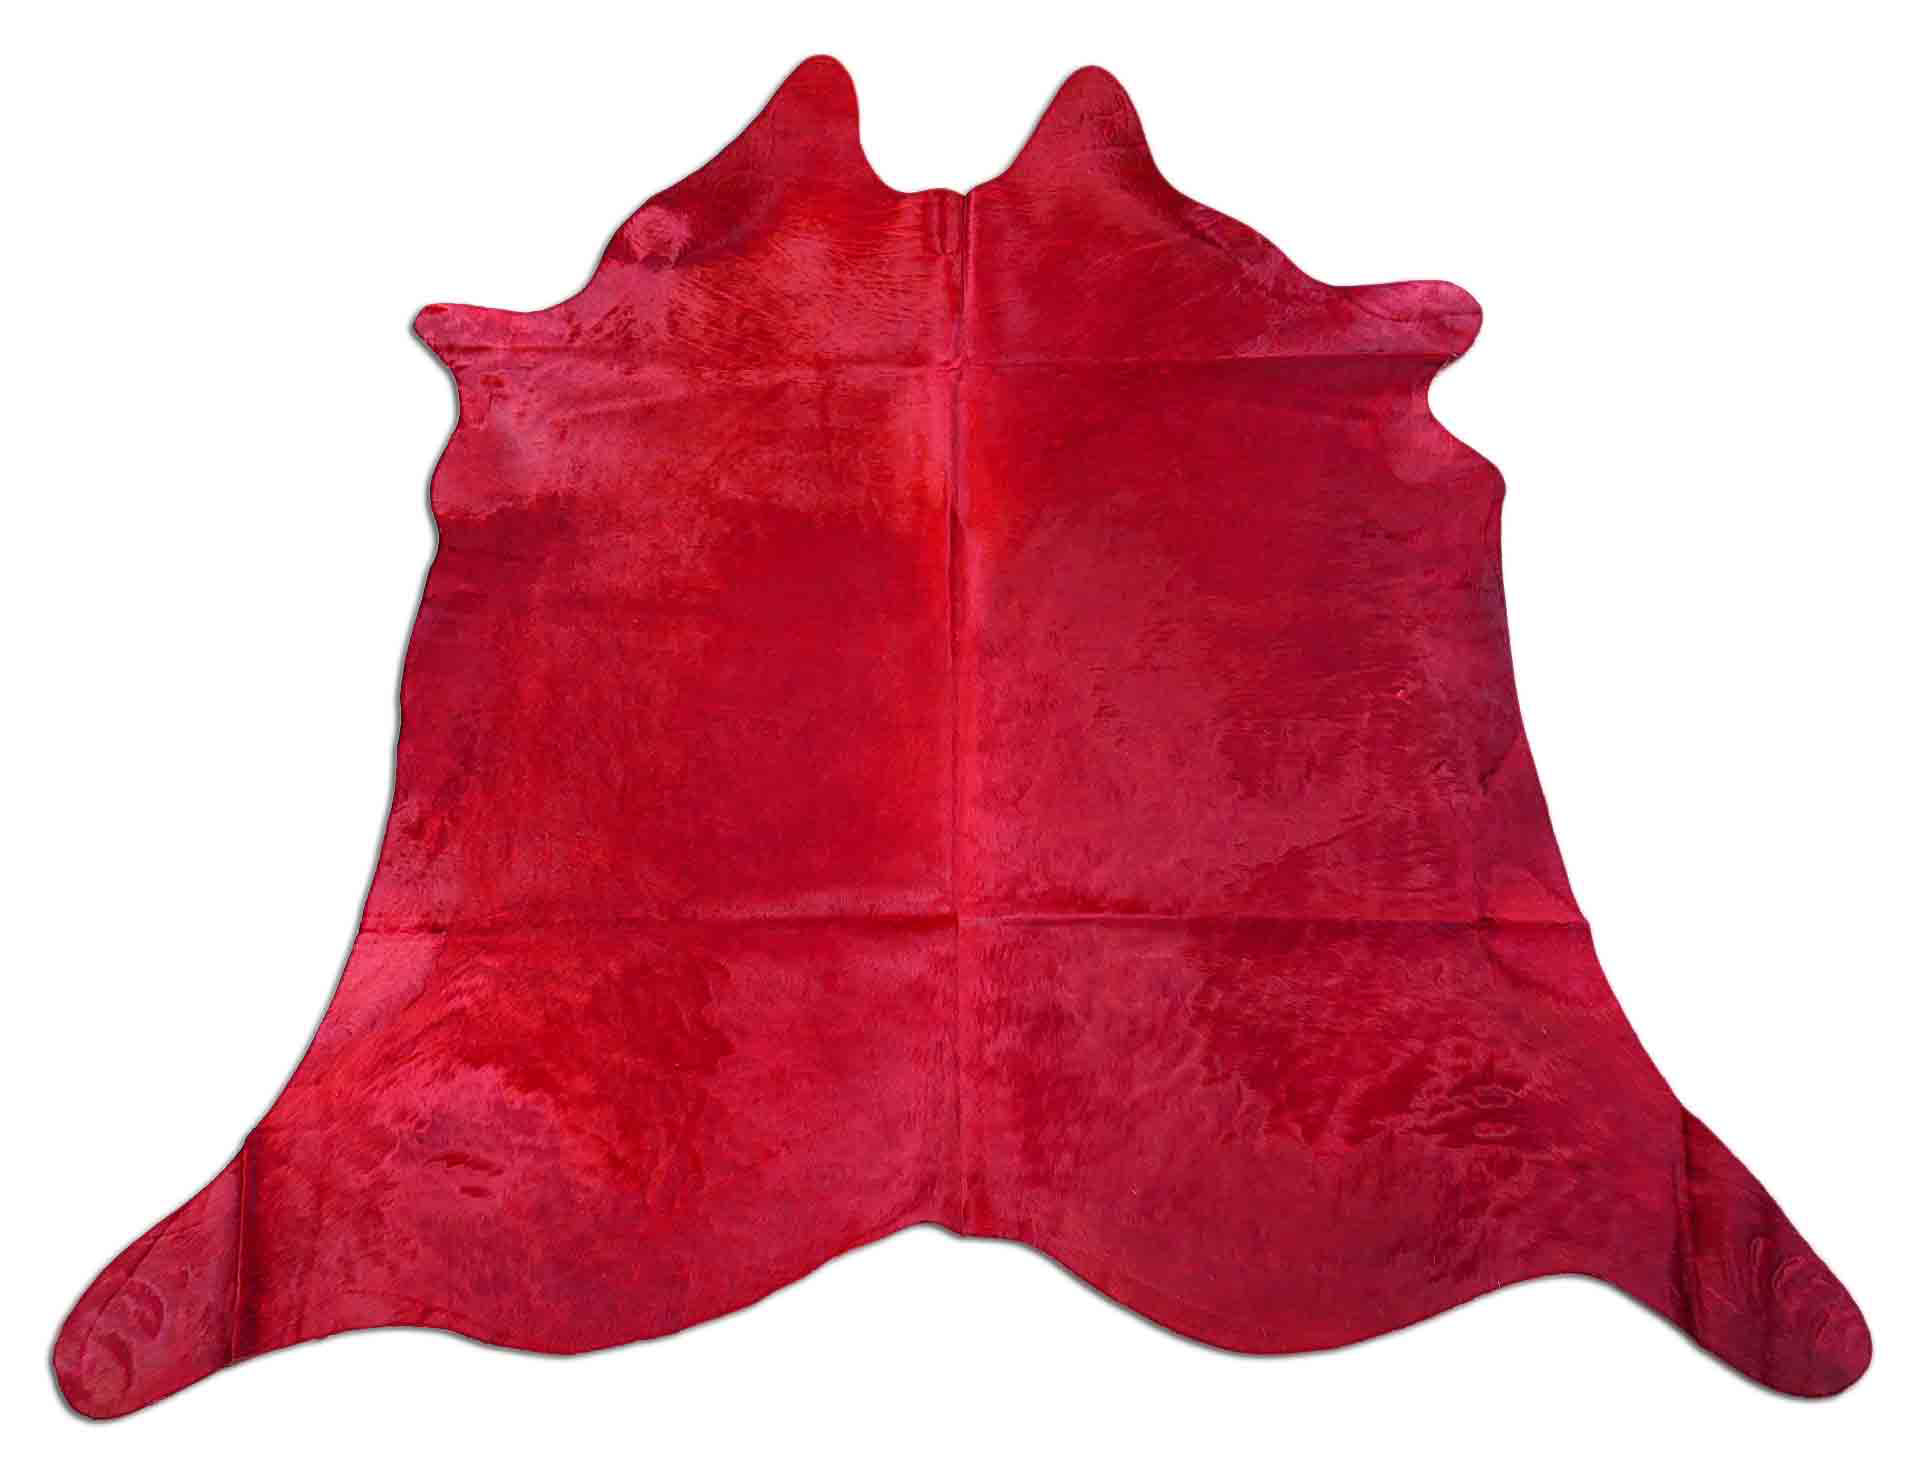 Home Garden Rugs Carpets 7 X 7 Ft Dyed Red Cowhide Rugs Dyed